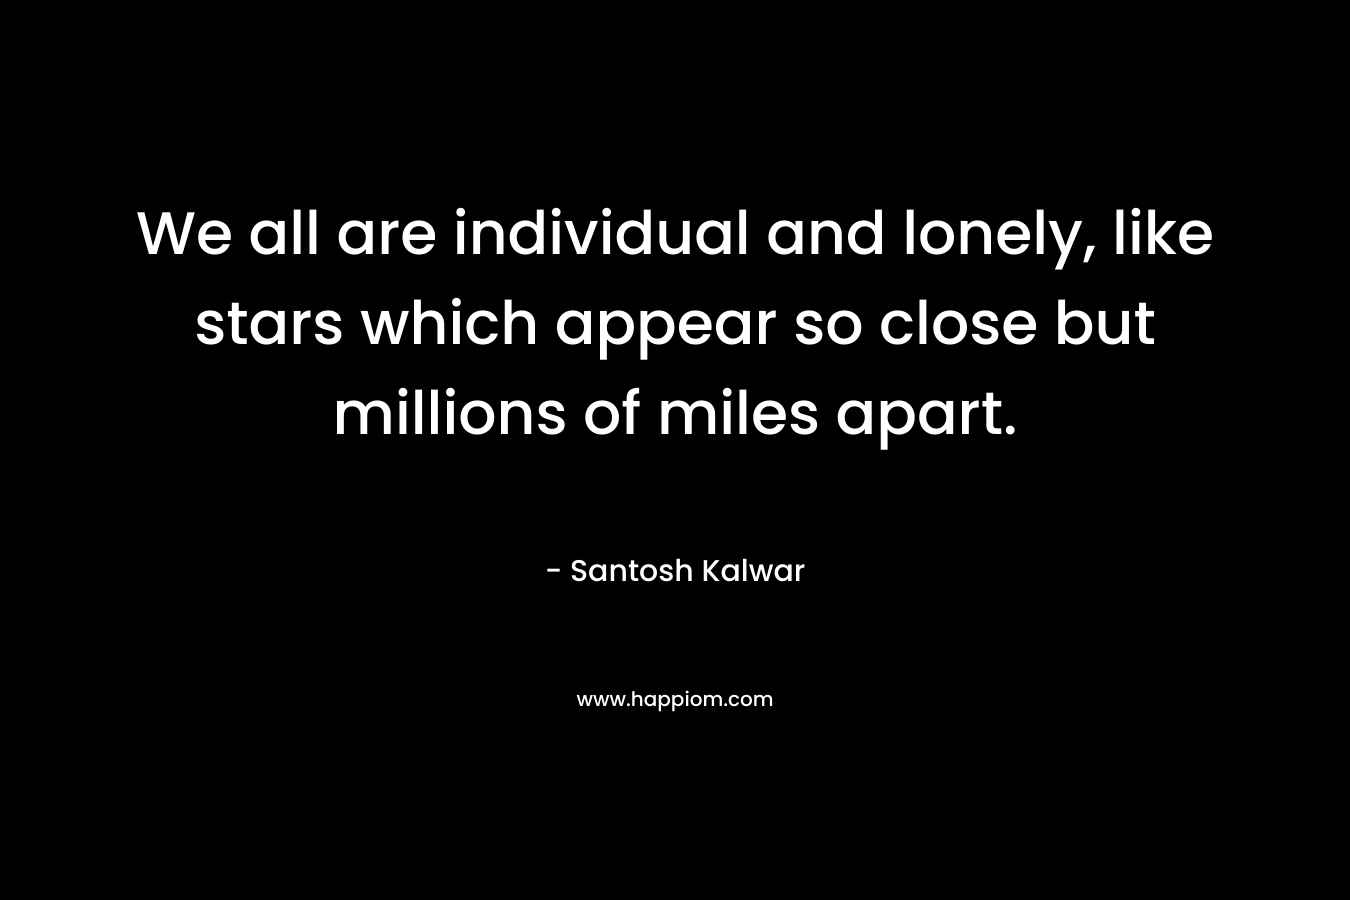 We all are individual and lonely, like stars which appear so close but millions of miles apart. – Santosh Kalwar